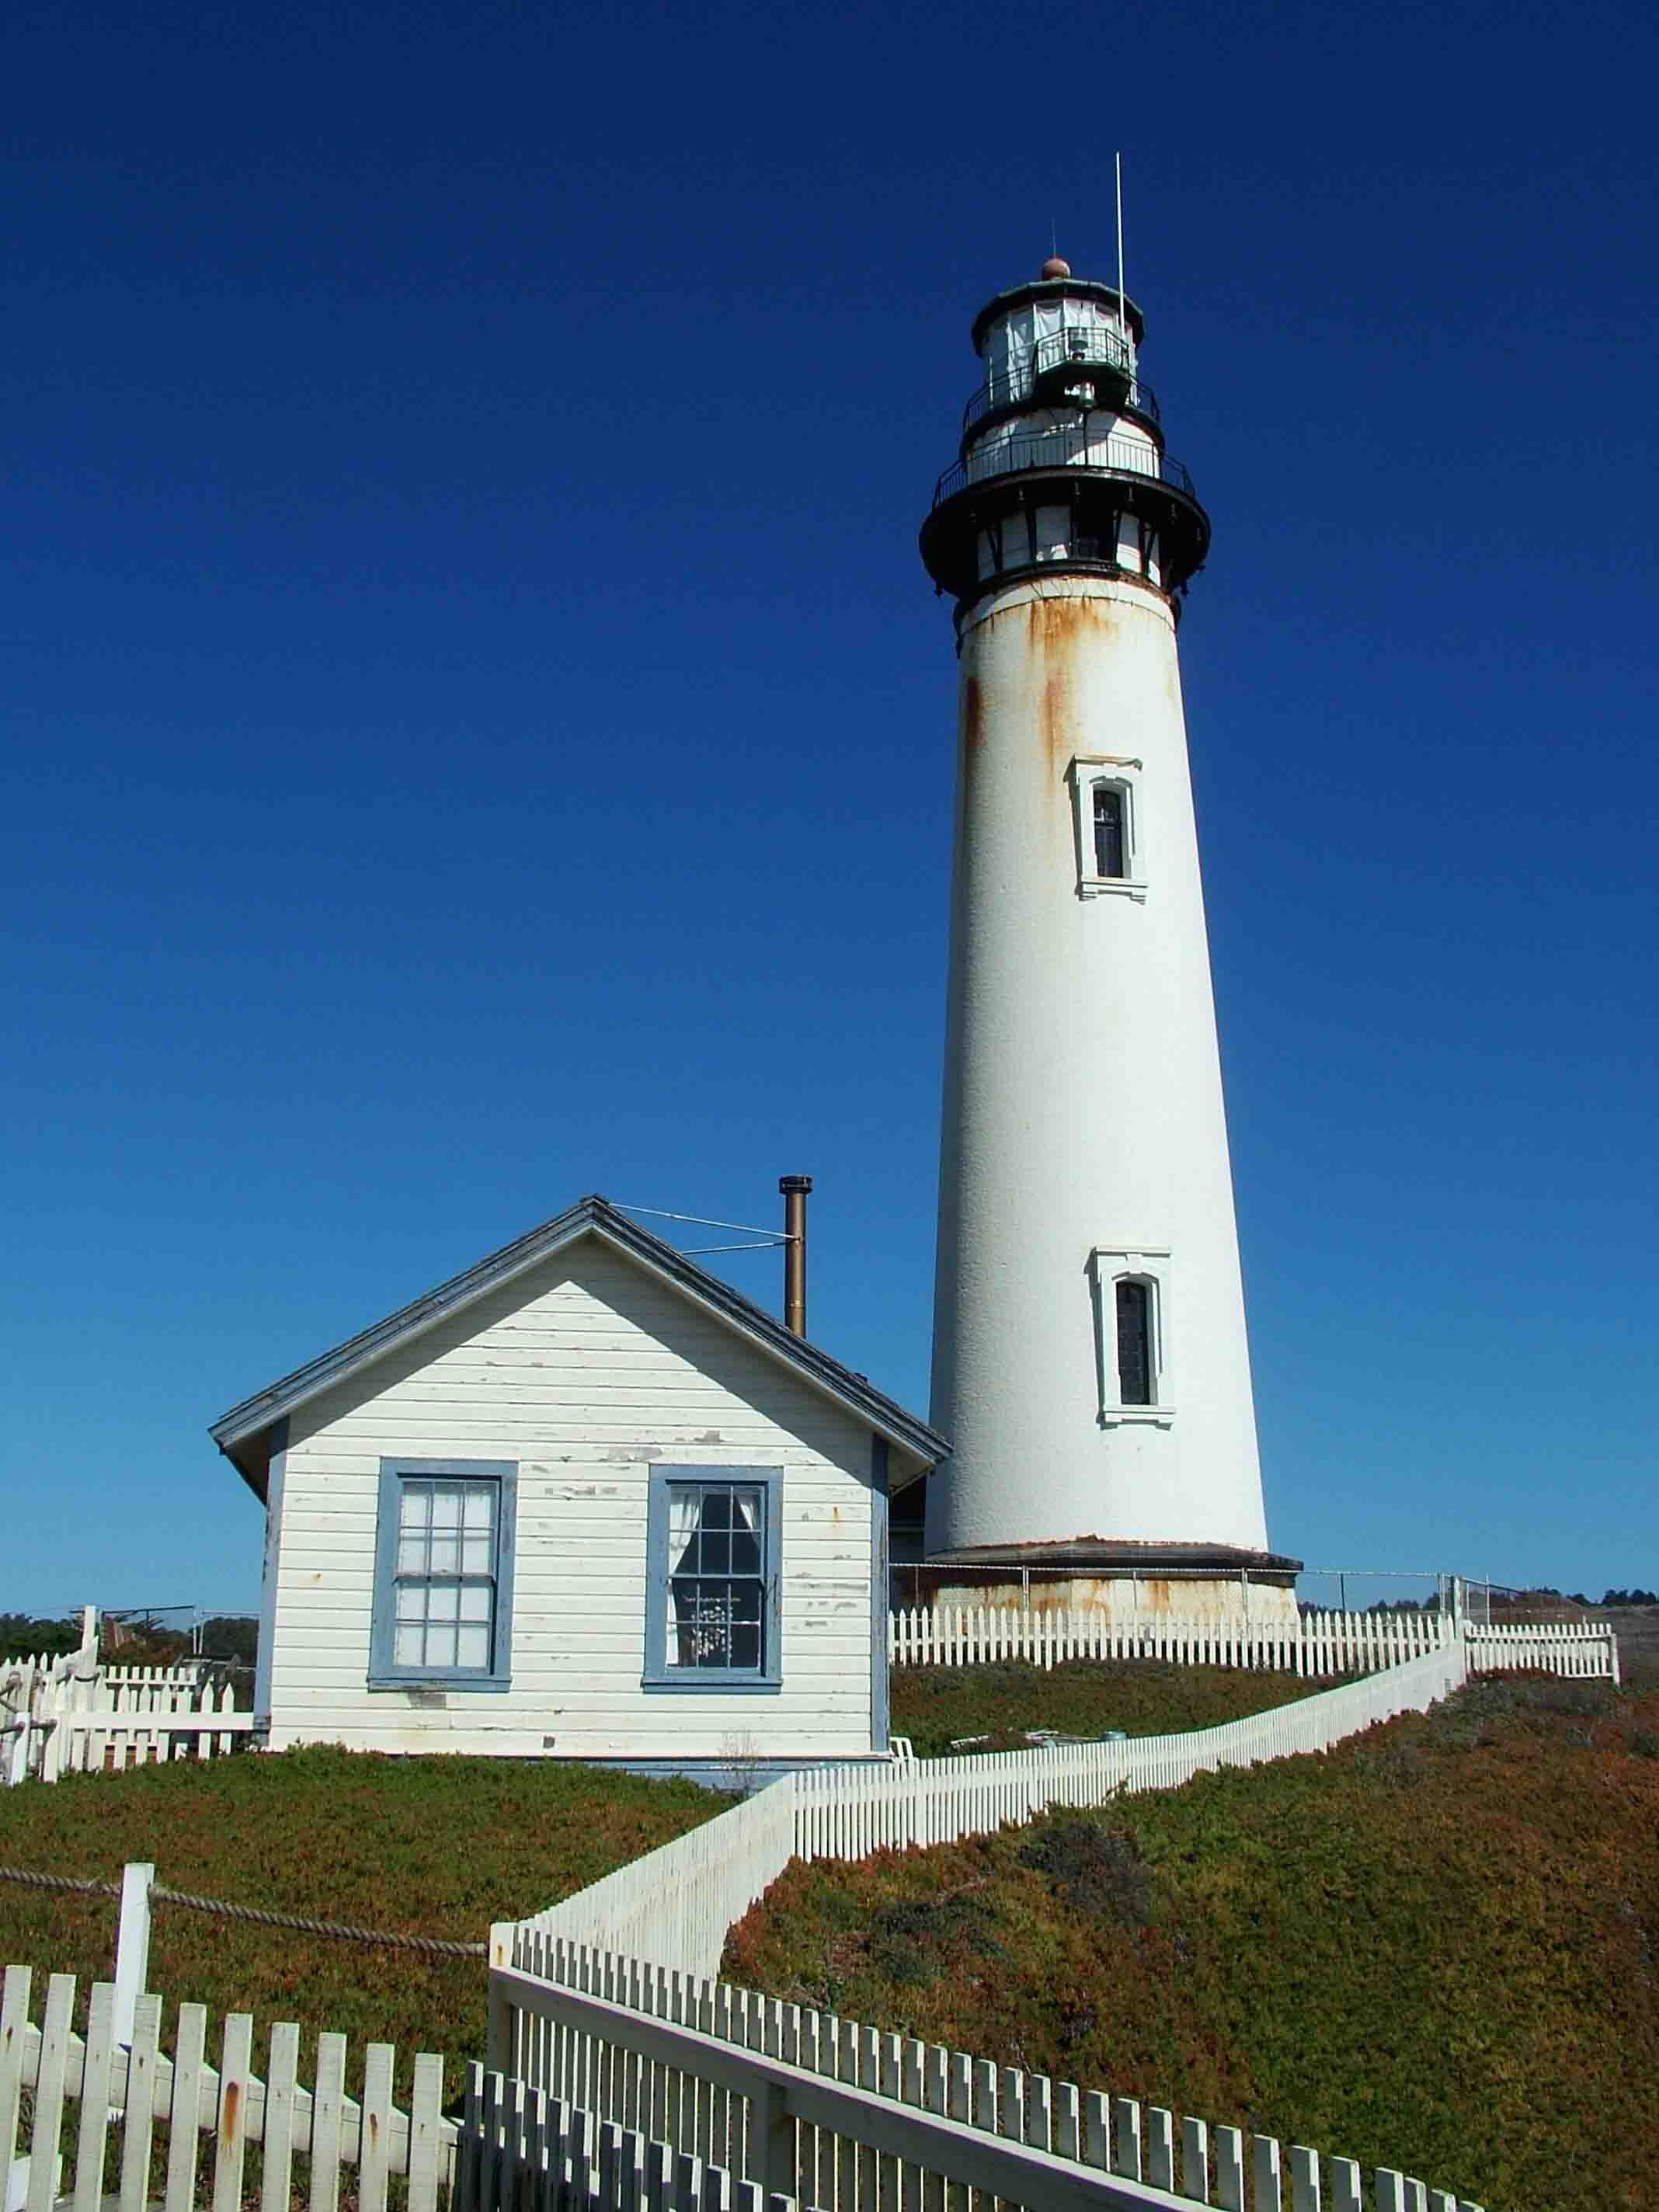 Pigeon Point Light Station Tower Image